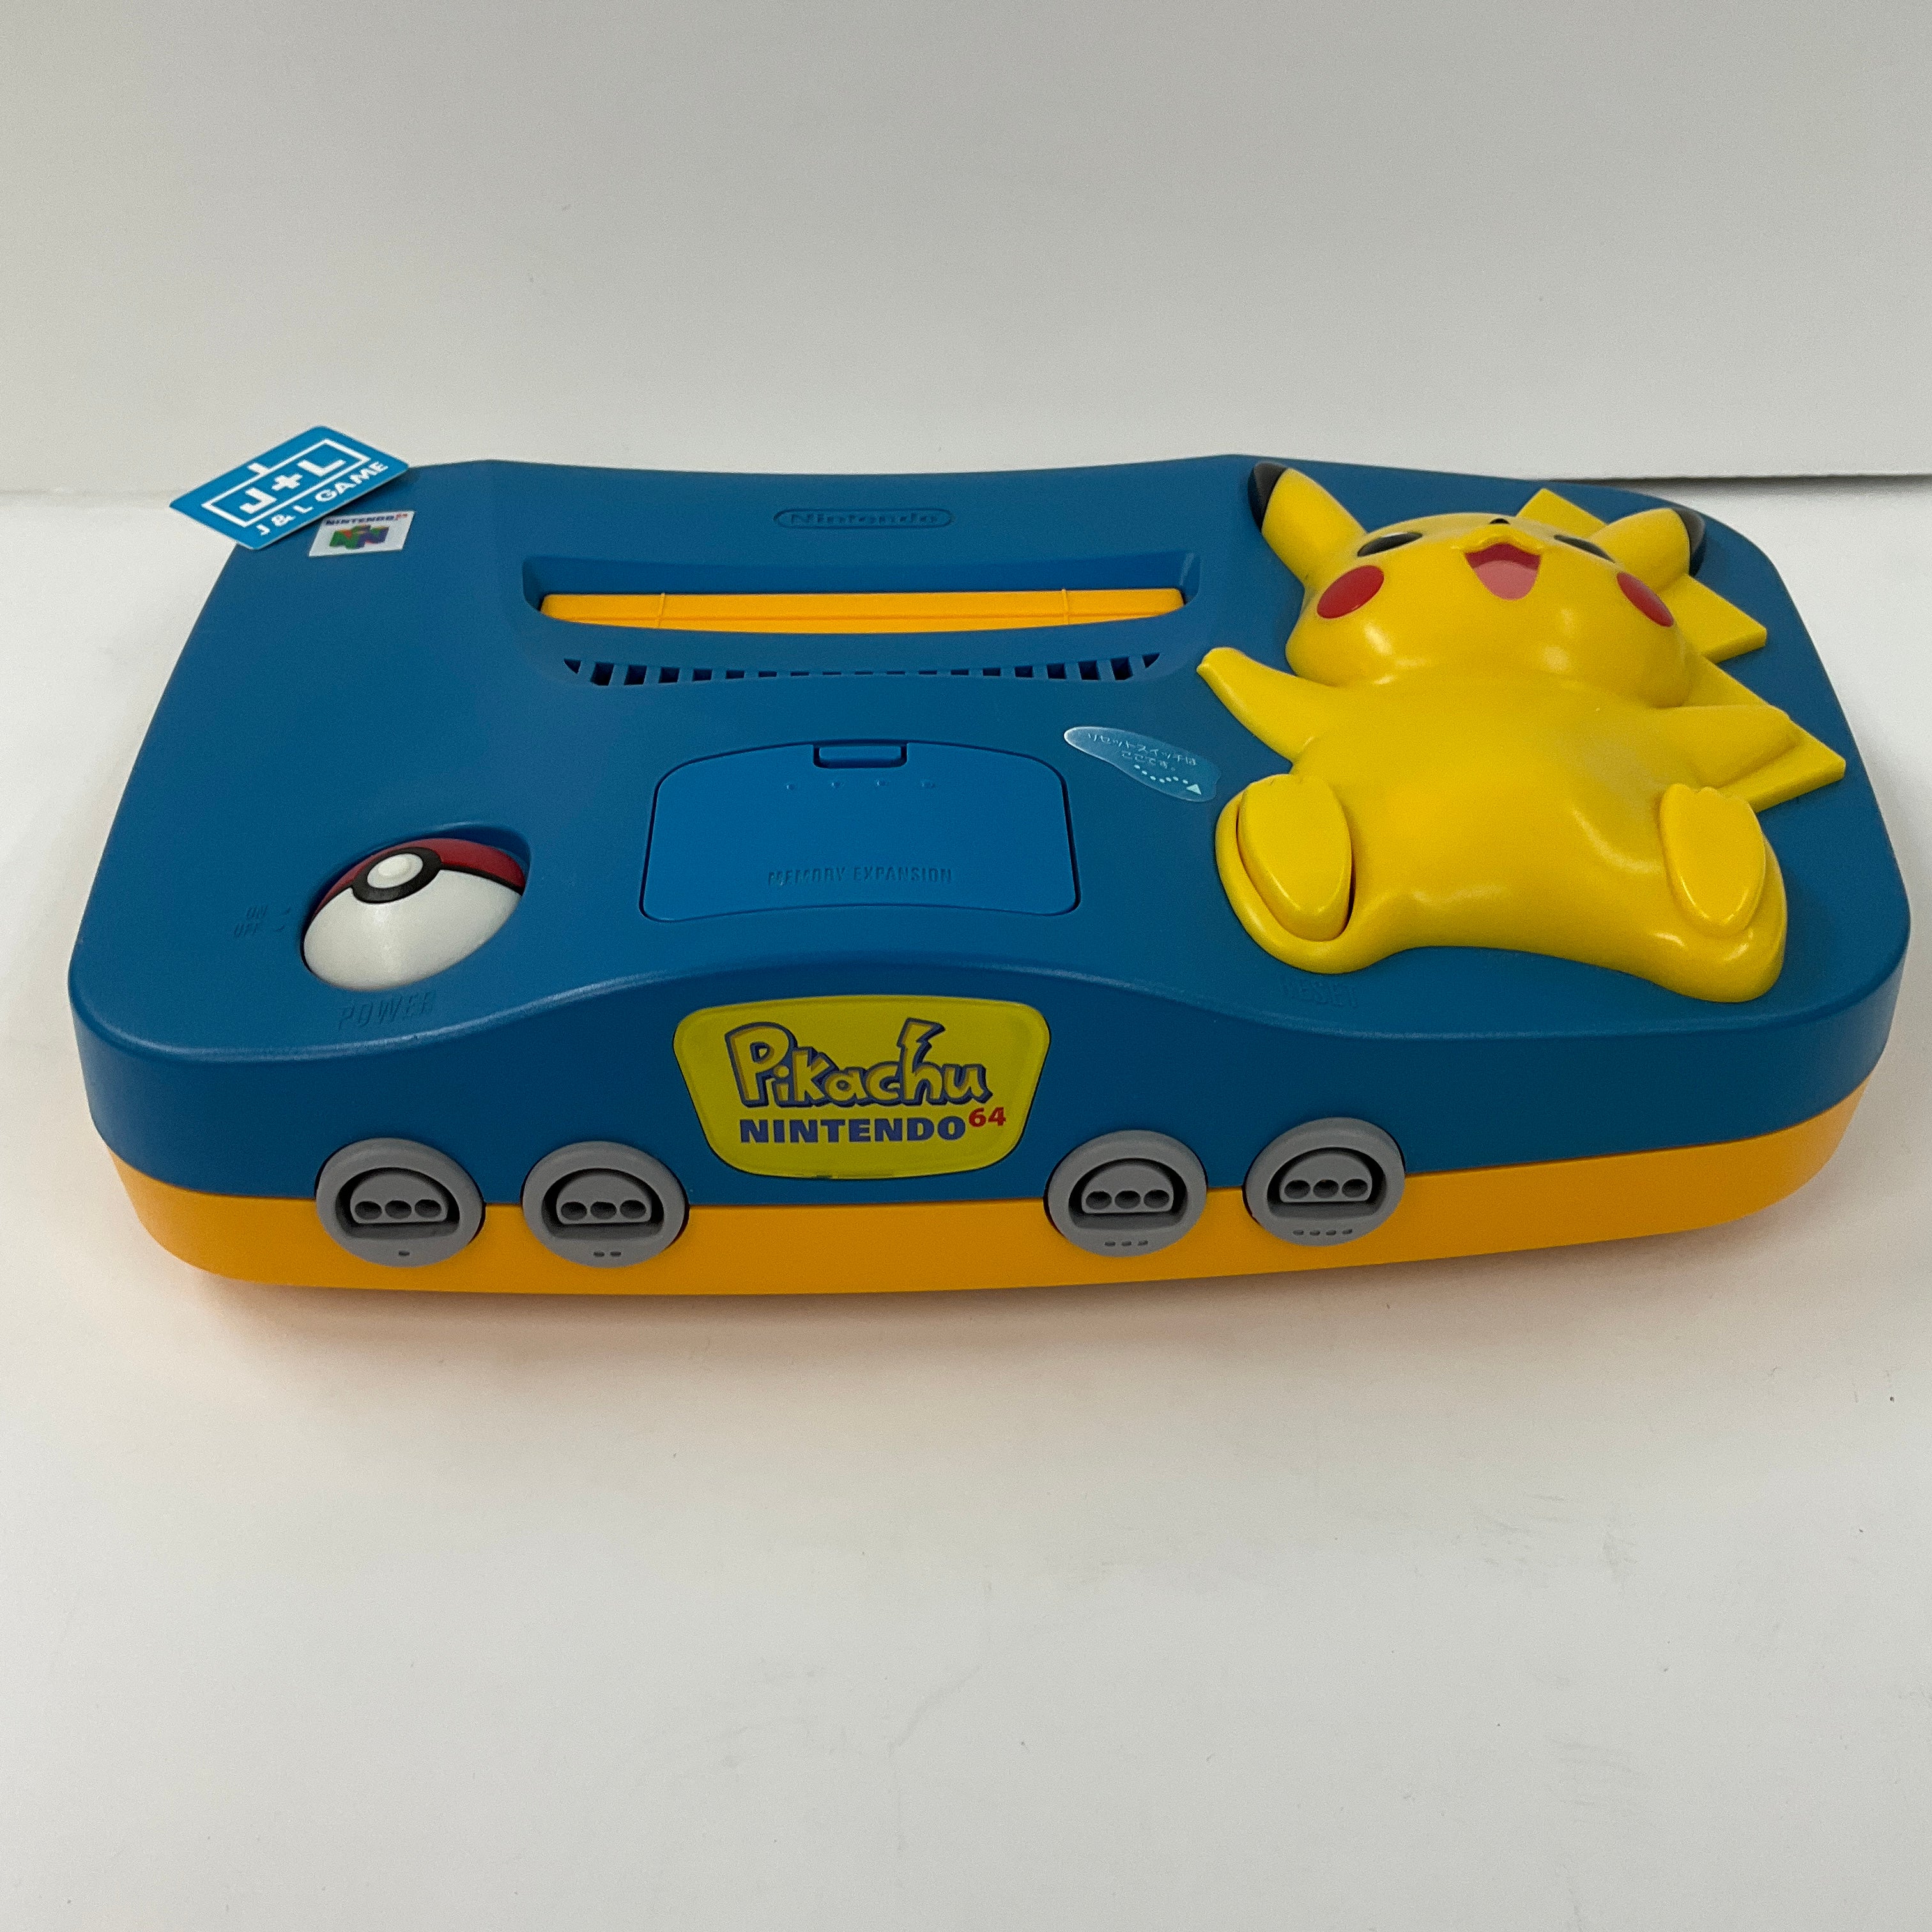 Nintendo 64 Hardware Console (Pikachu Edition) (Blue and Yellow) - (N64) Nintendo 64 (Japanese Import) [Pre-Owned] CONSOLE Nintendo   